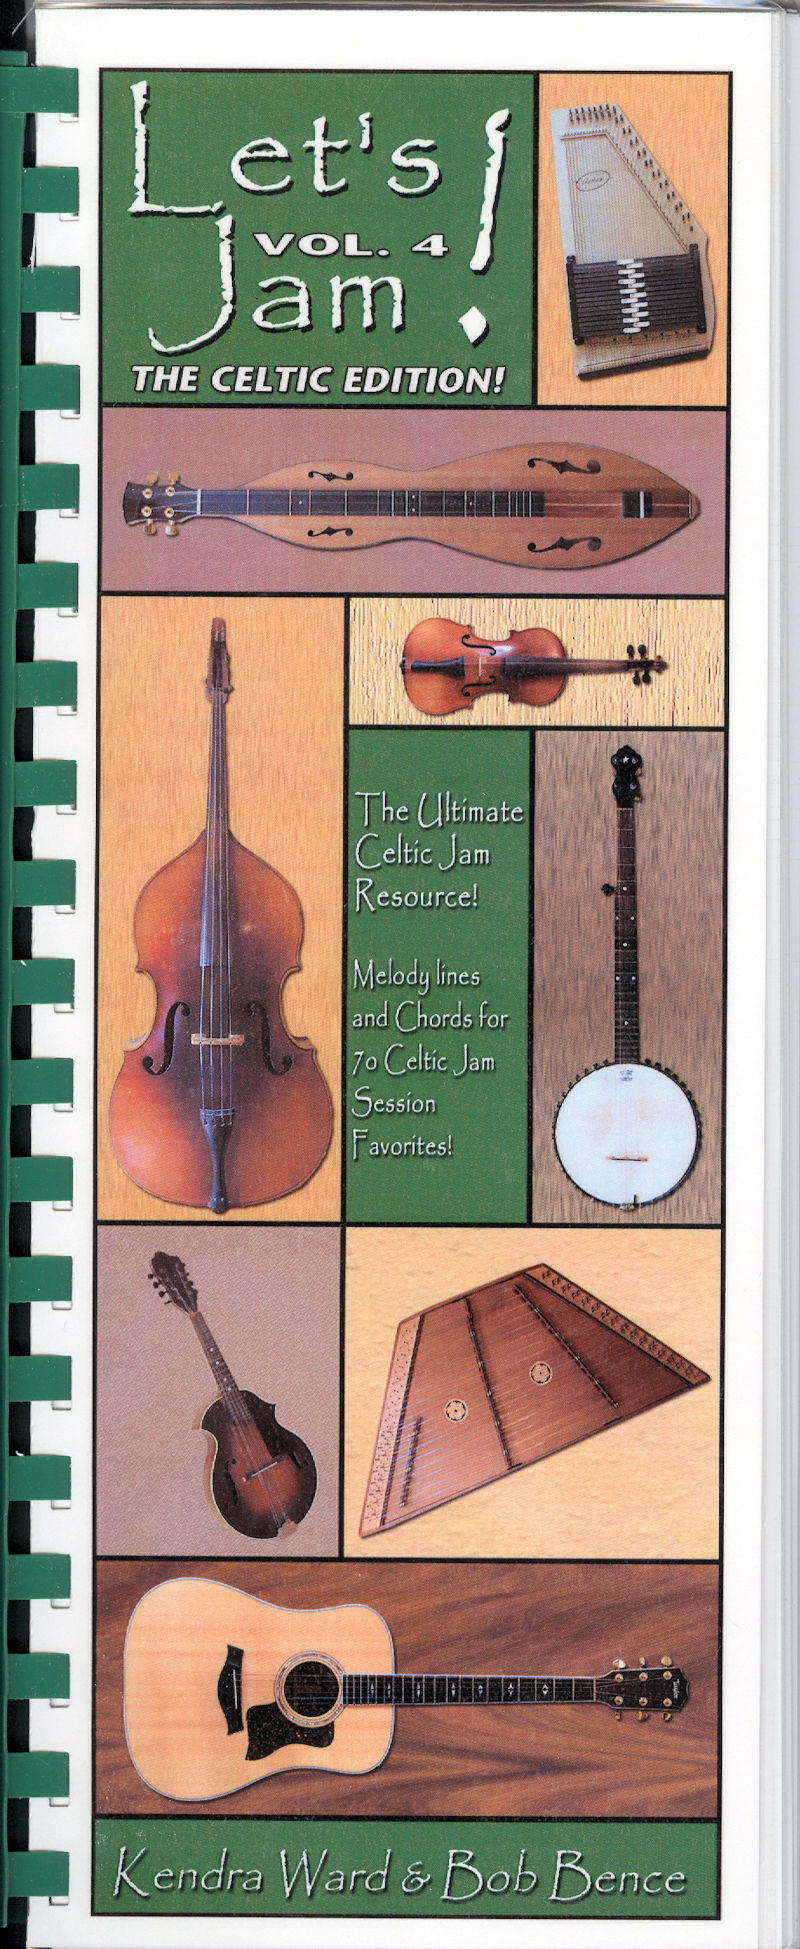 Let's Jam! Vol. 4 The Celtic Edition - by Kendra Ward and Bob Bence